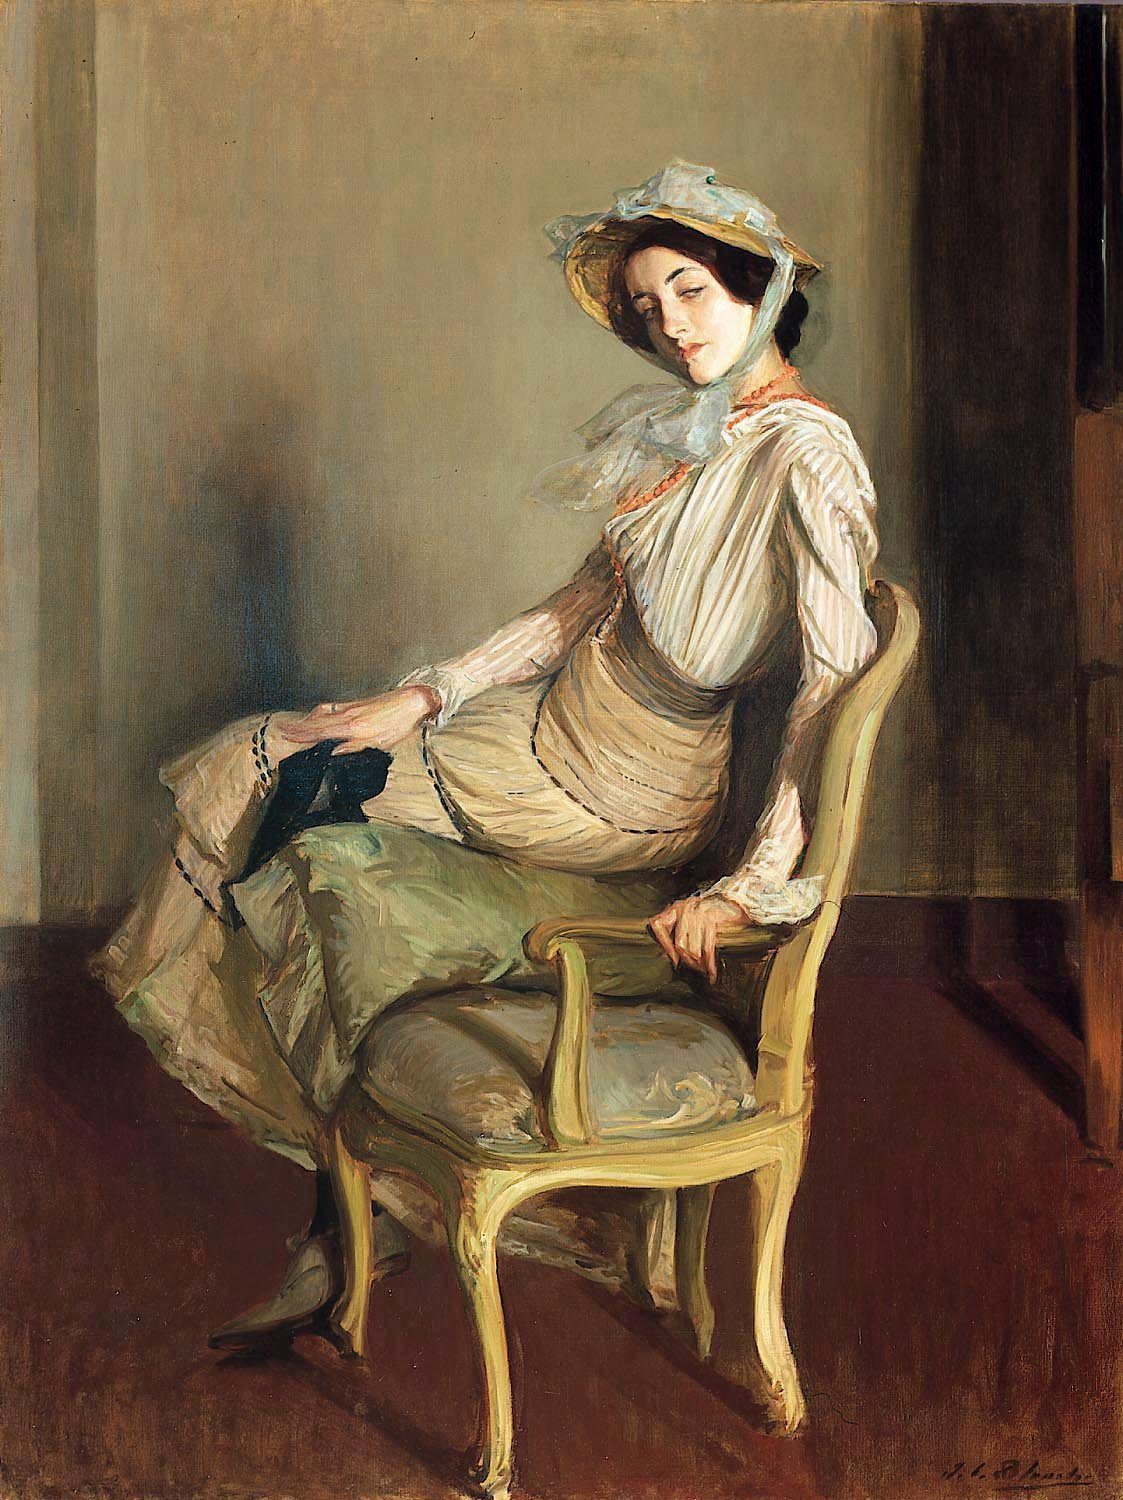 Desirée Manfred (The Summer Girl) (1904). Jacques-Émile Blanche (French, 1861-1942). Oil on canvas.
Dated by Jane Roberts to 1904, this painting portrays one of Blanche’s favorite models in informal pose, seated on the arm of a delicate fauteuil....